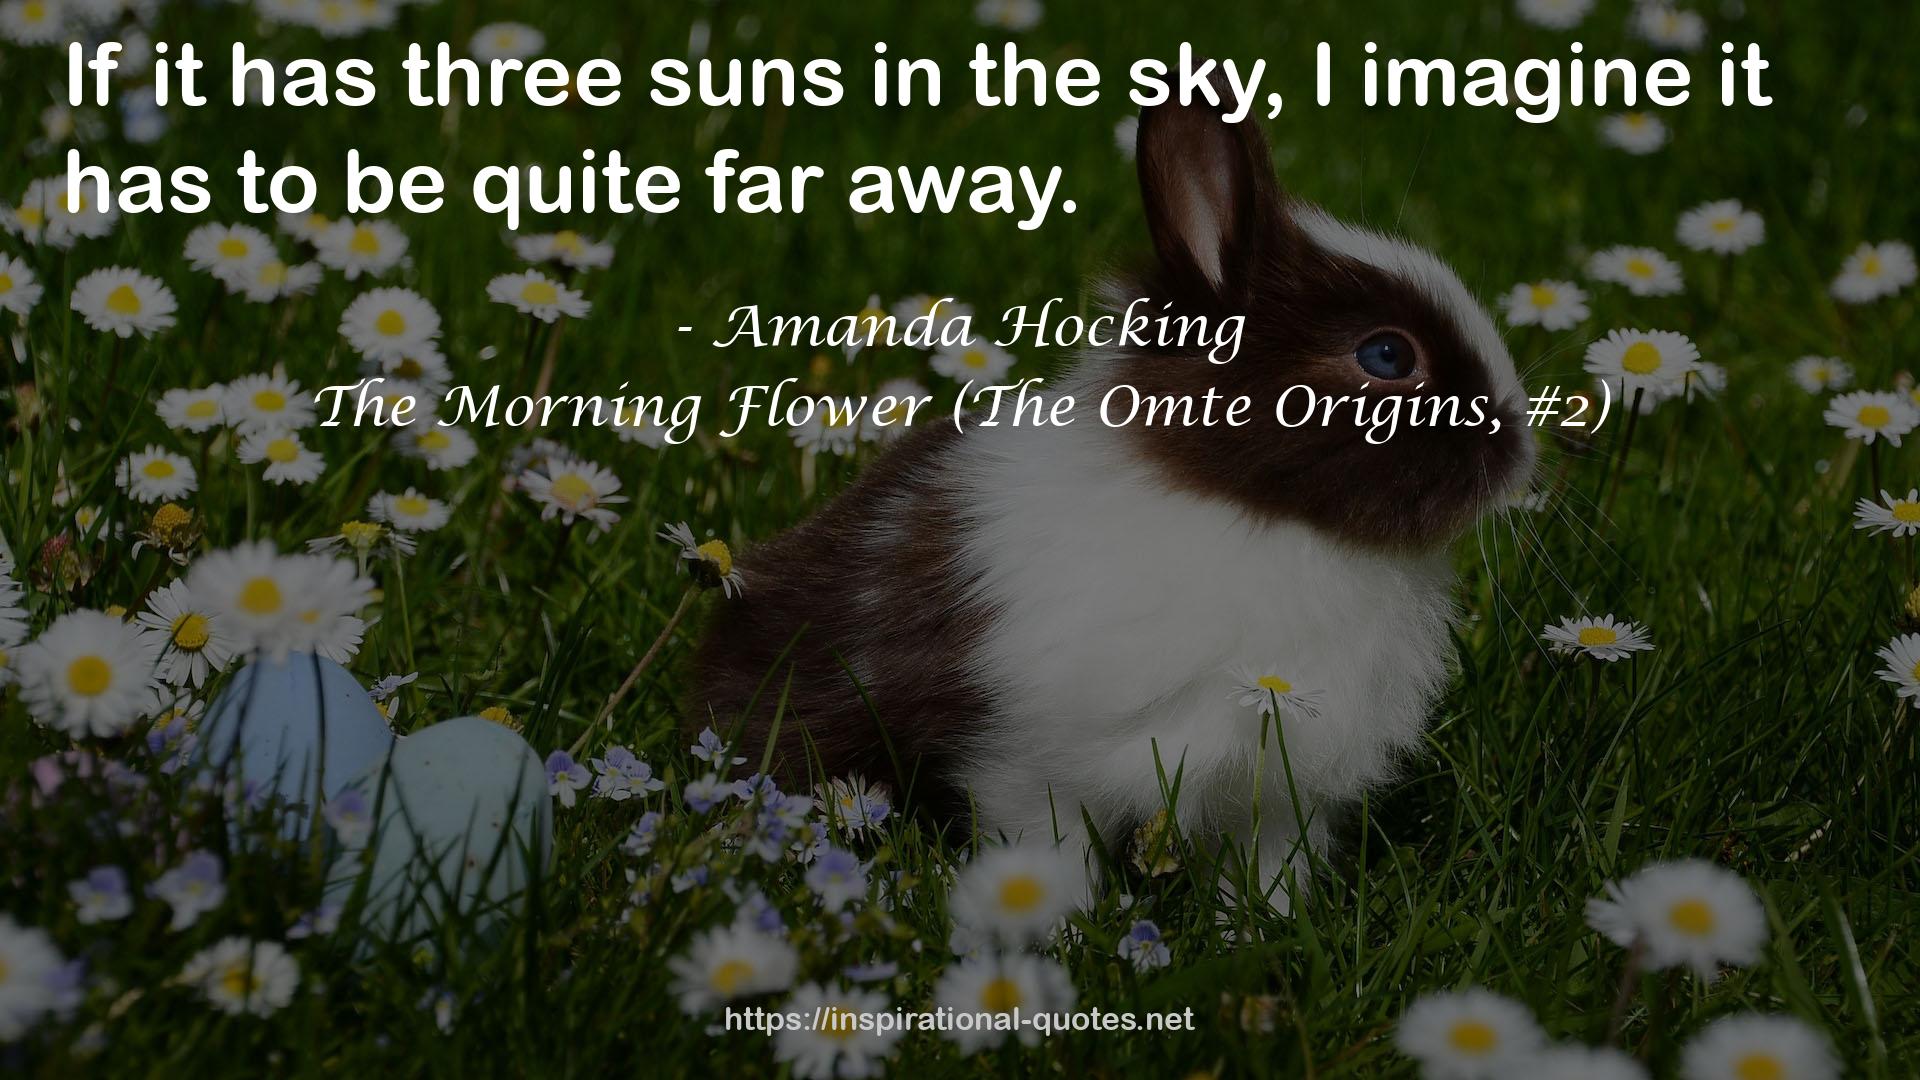 The Morning Flower (The Omte Origins, #2) QUOTES